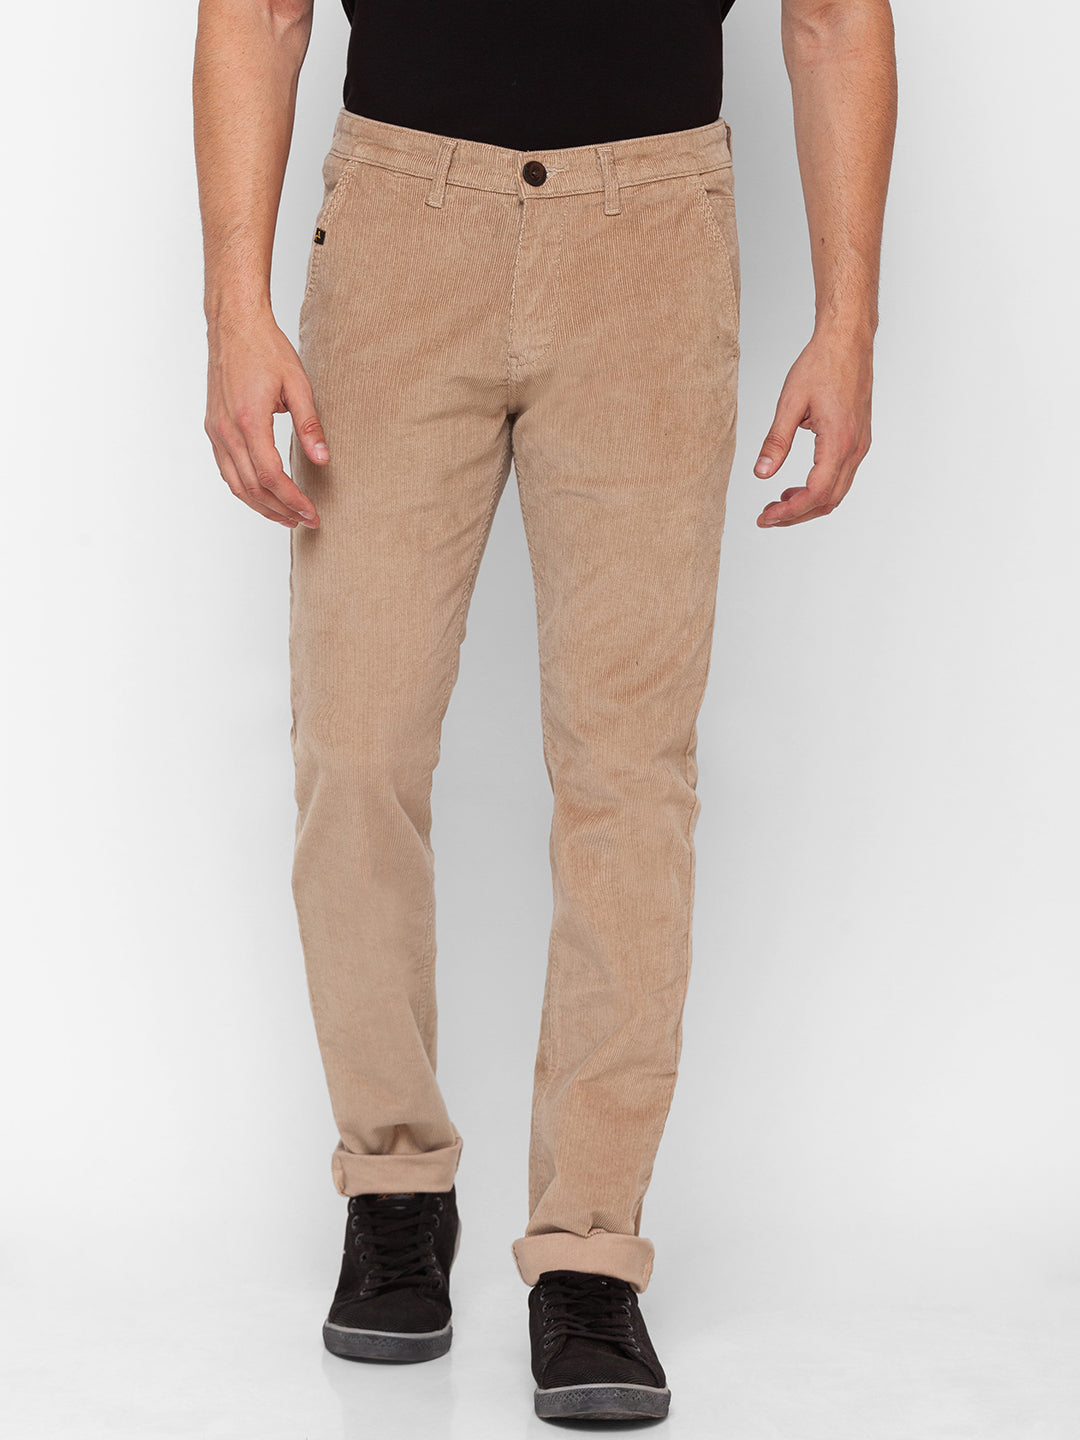 Men's Yellow Cotton Solid Trousers